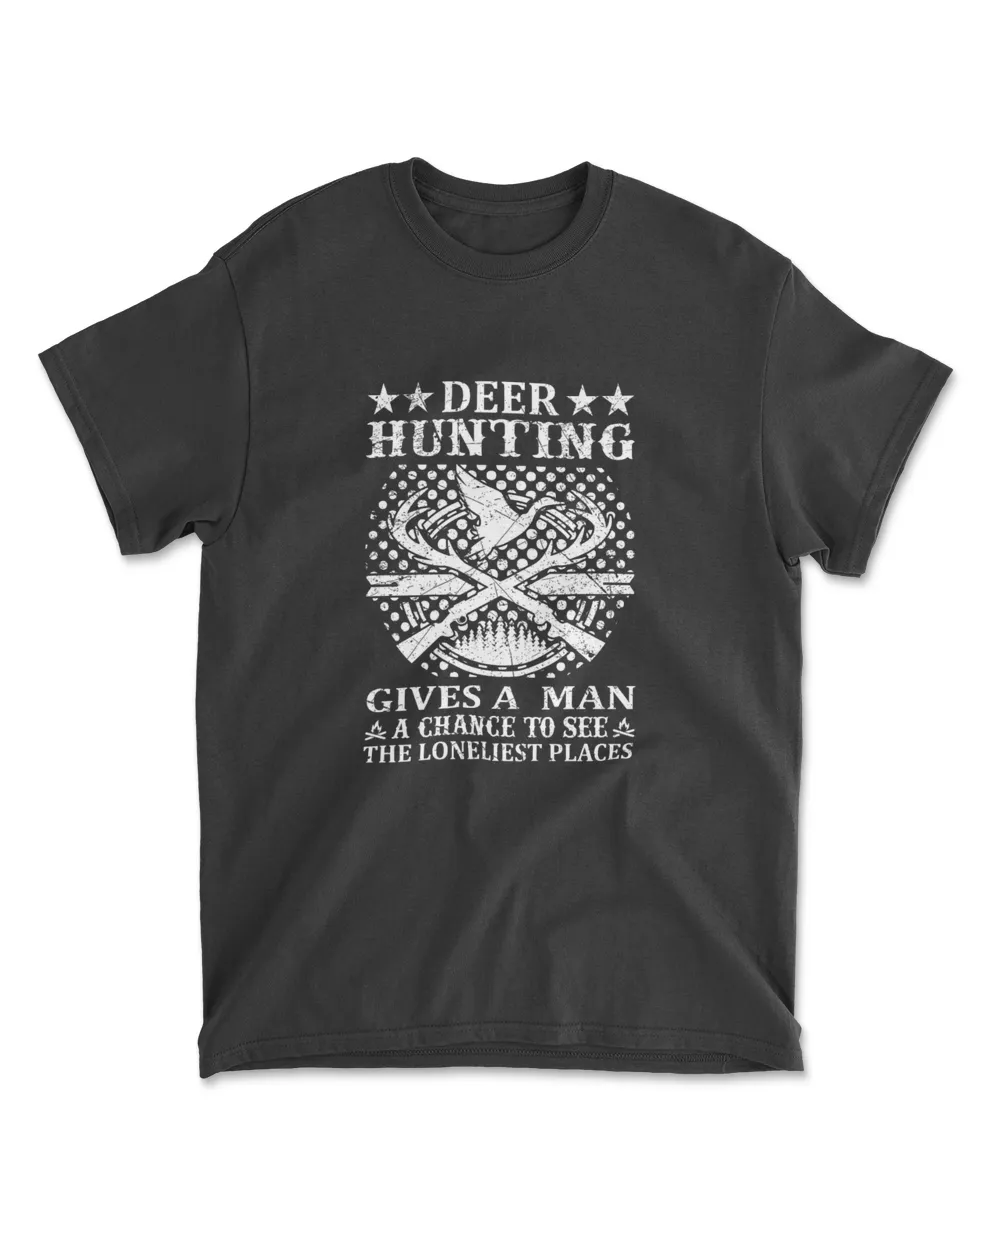 Deer hunting gives a man